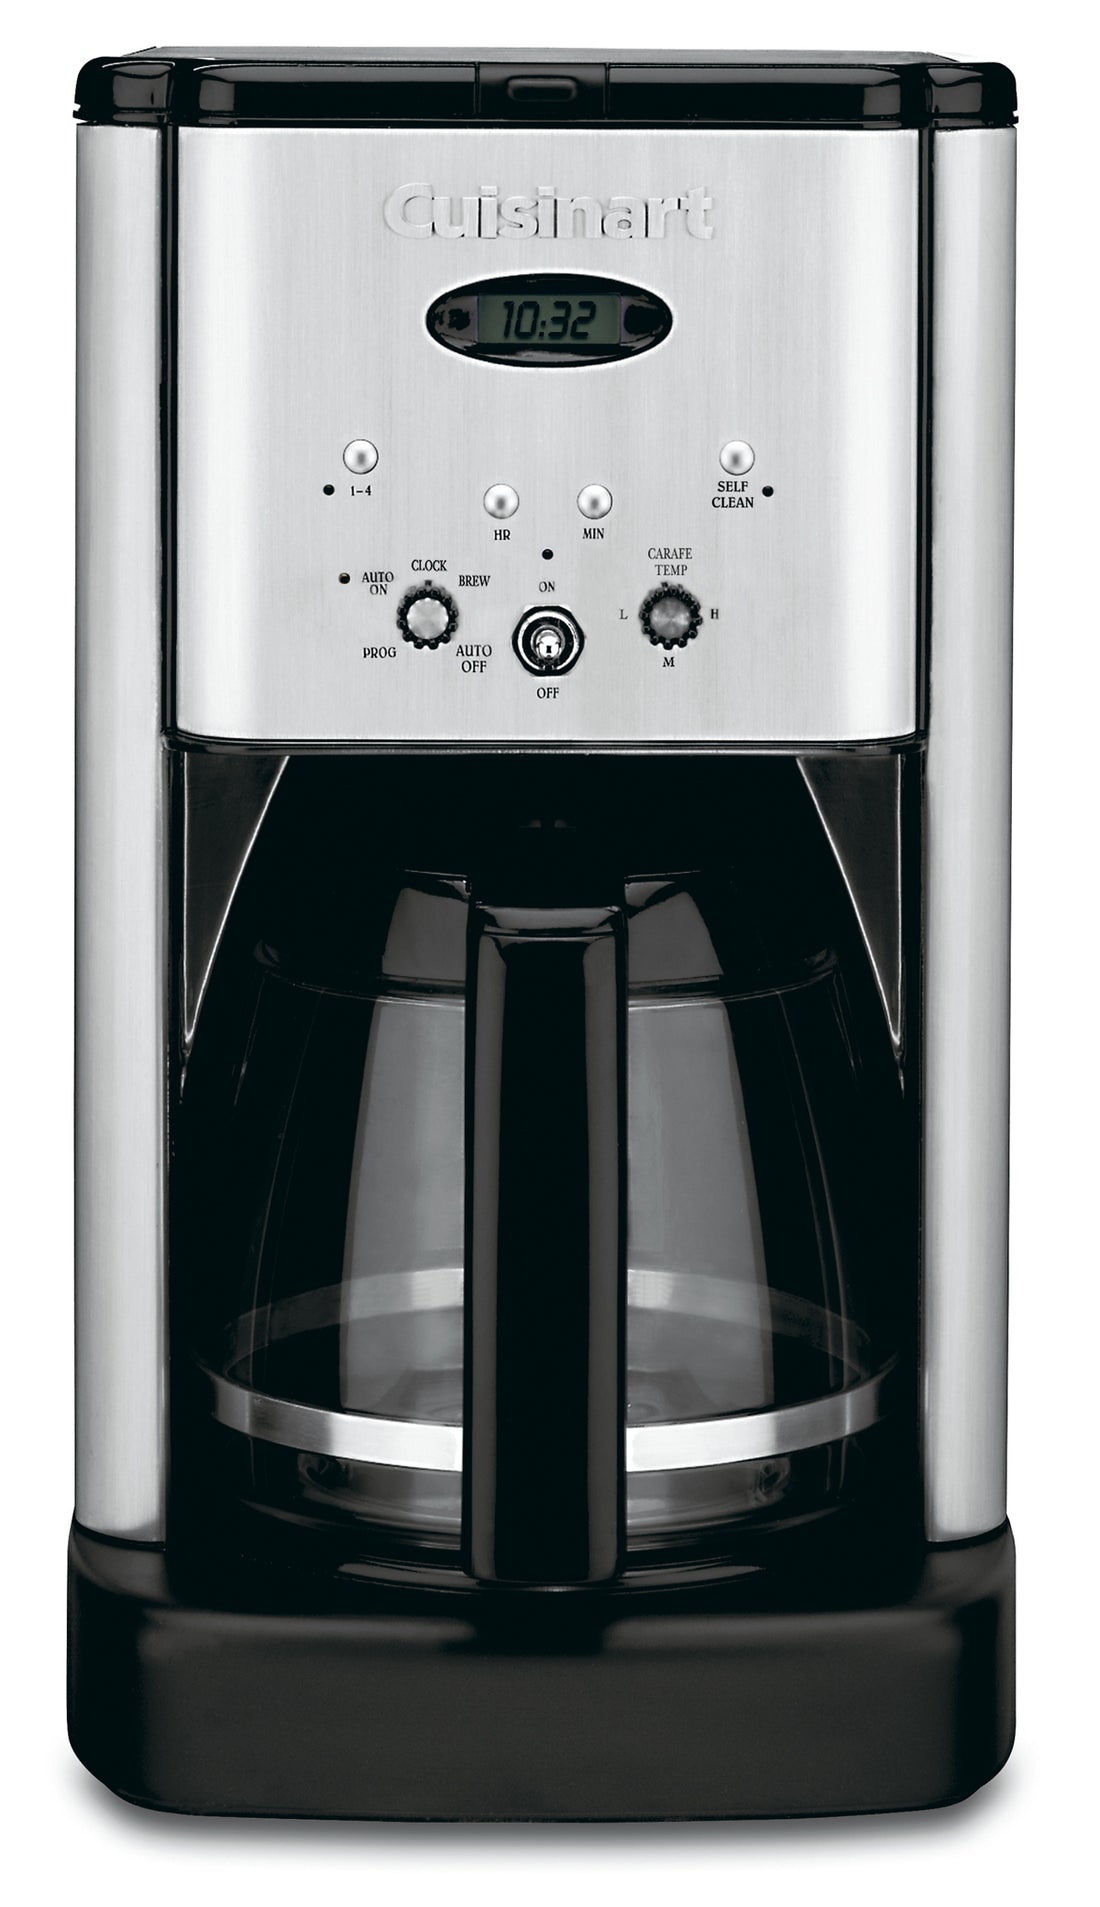 4 Cup Coffee Maker - Black quality but cheap priced dorm appliance